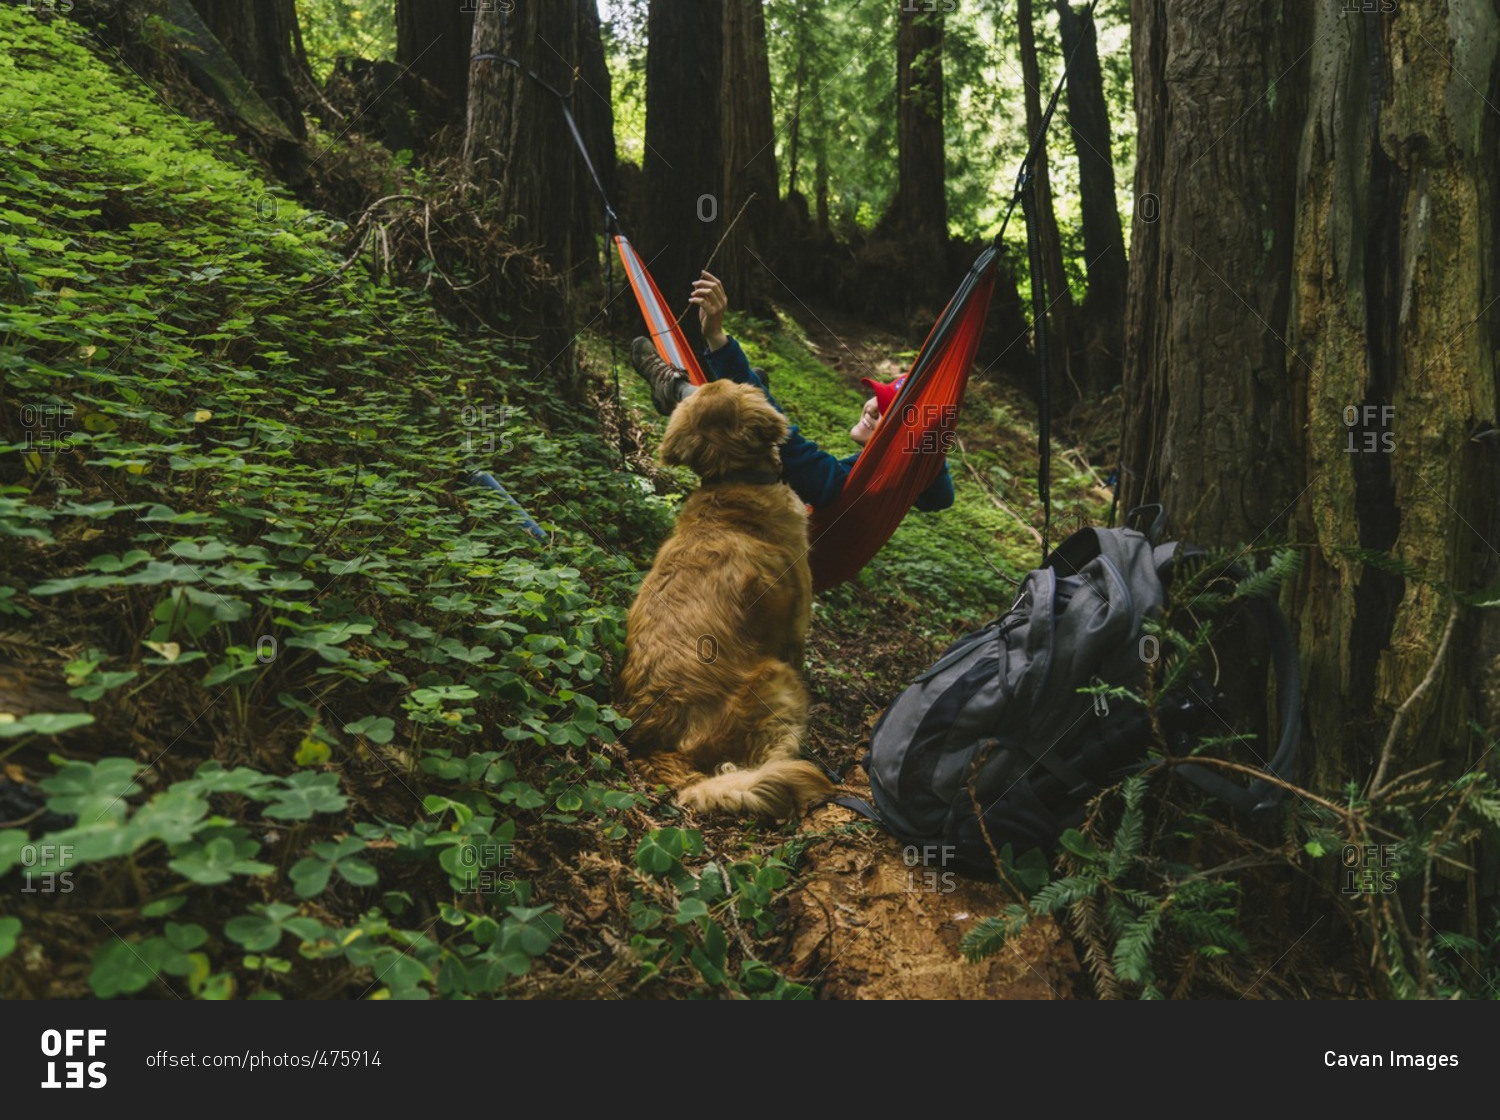 Happy woman playing with dog while lying on hammock in forest